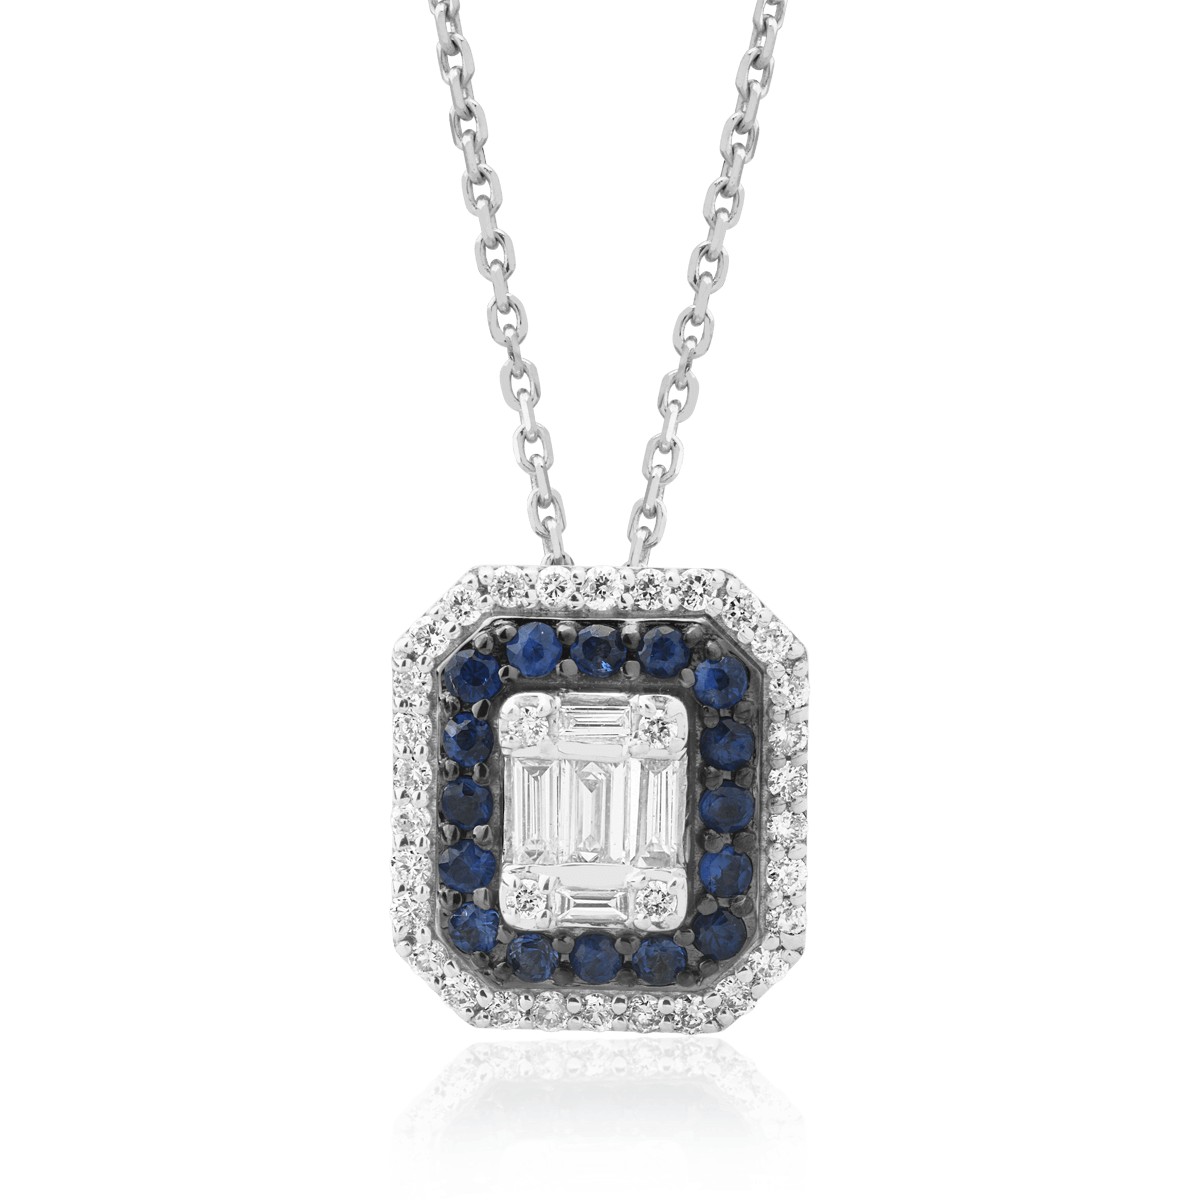 18K white gold pendant necklace with 0.74ct diamonds and 0.222ct sapphires